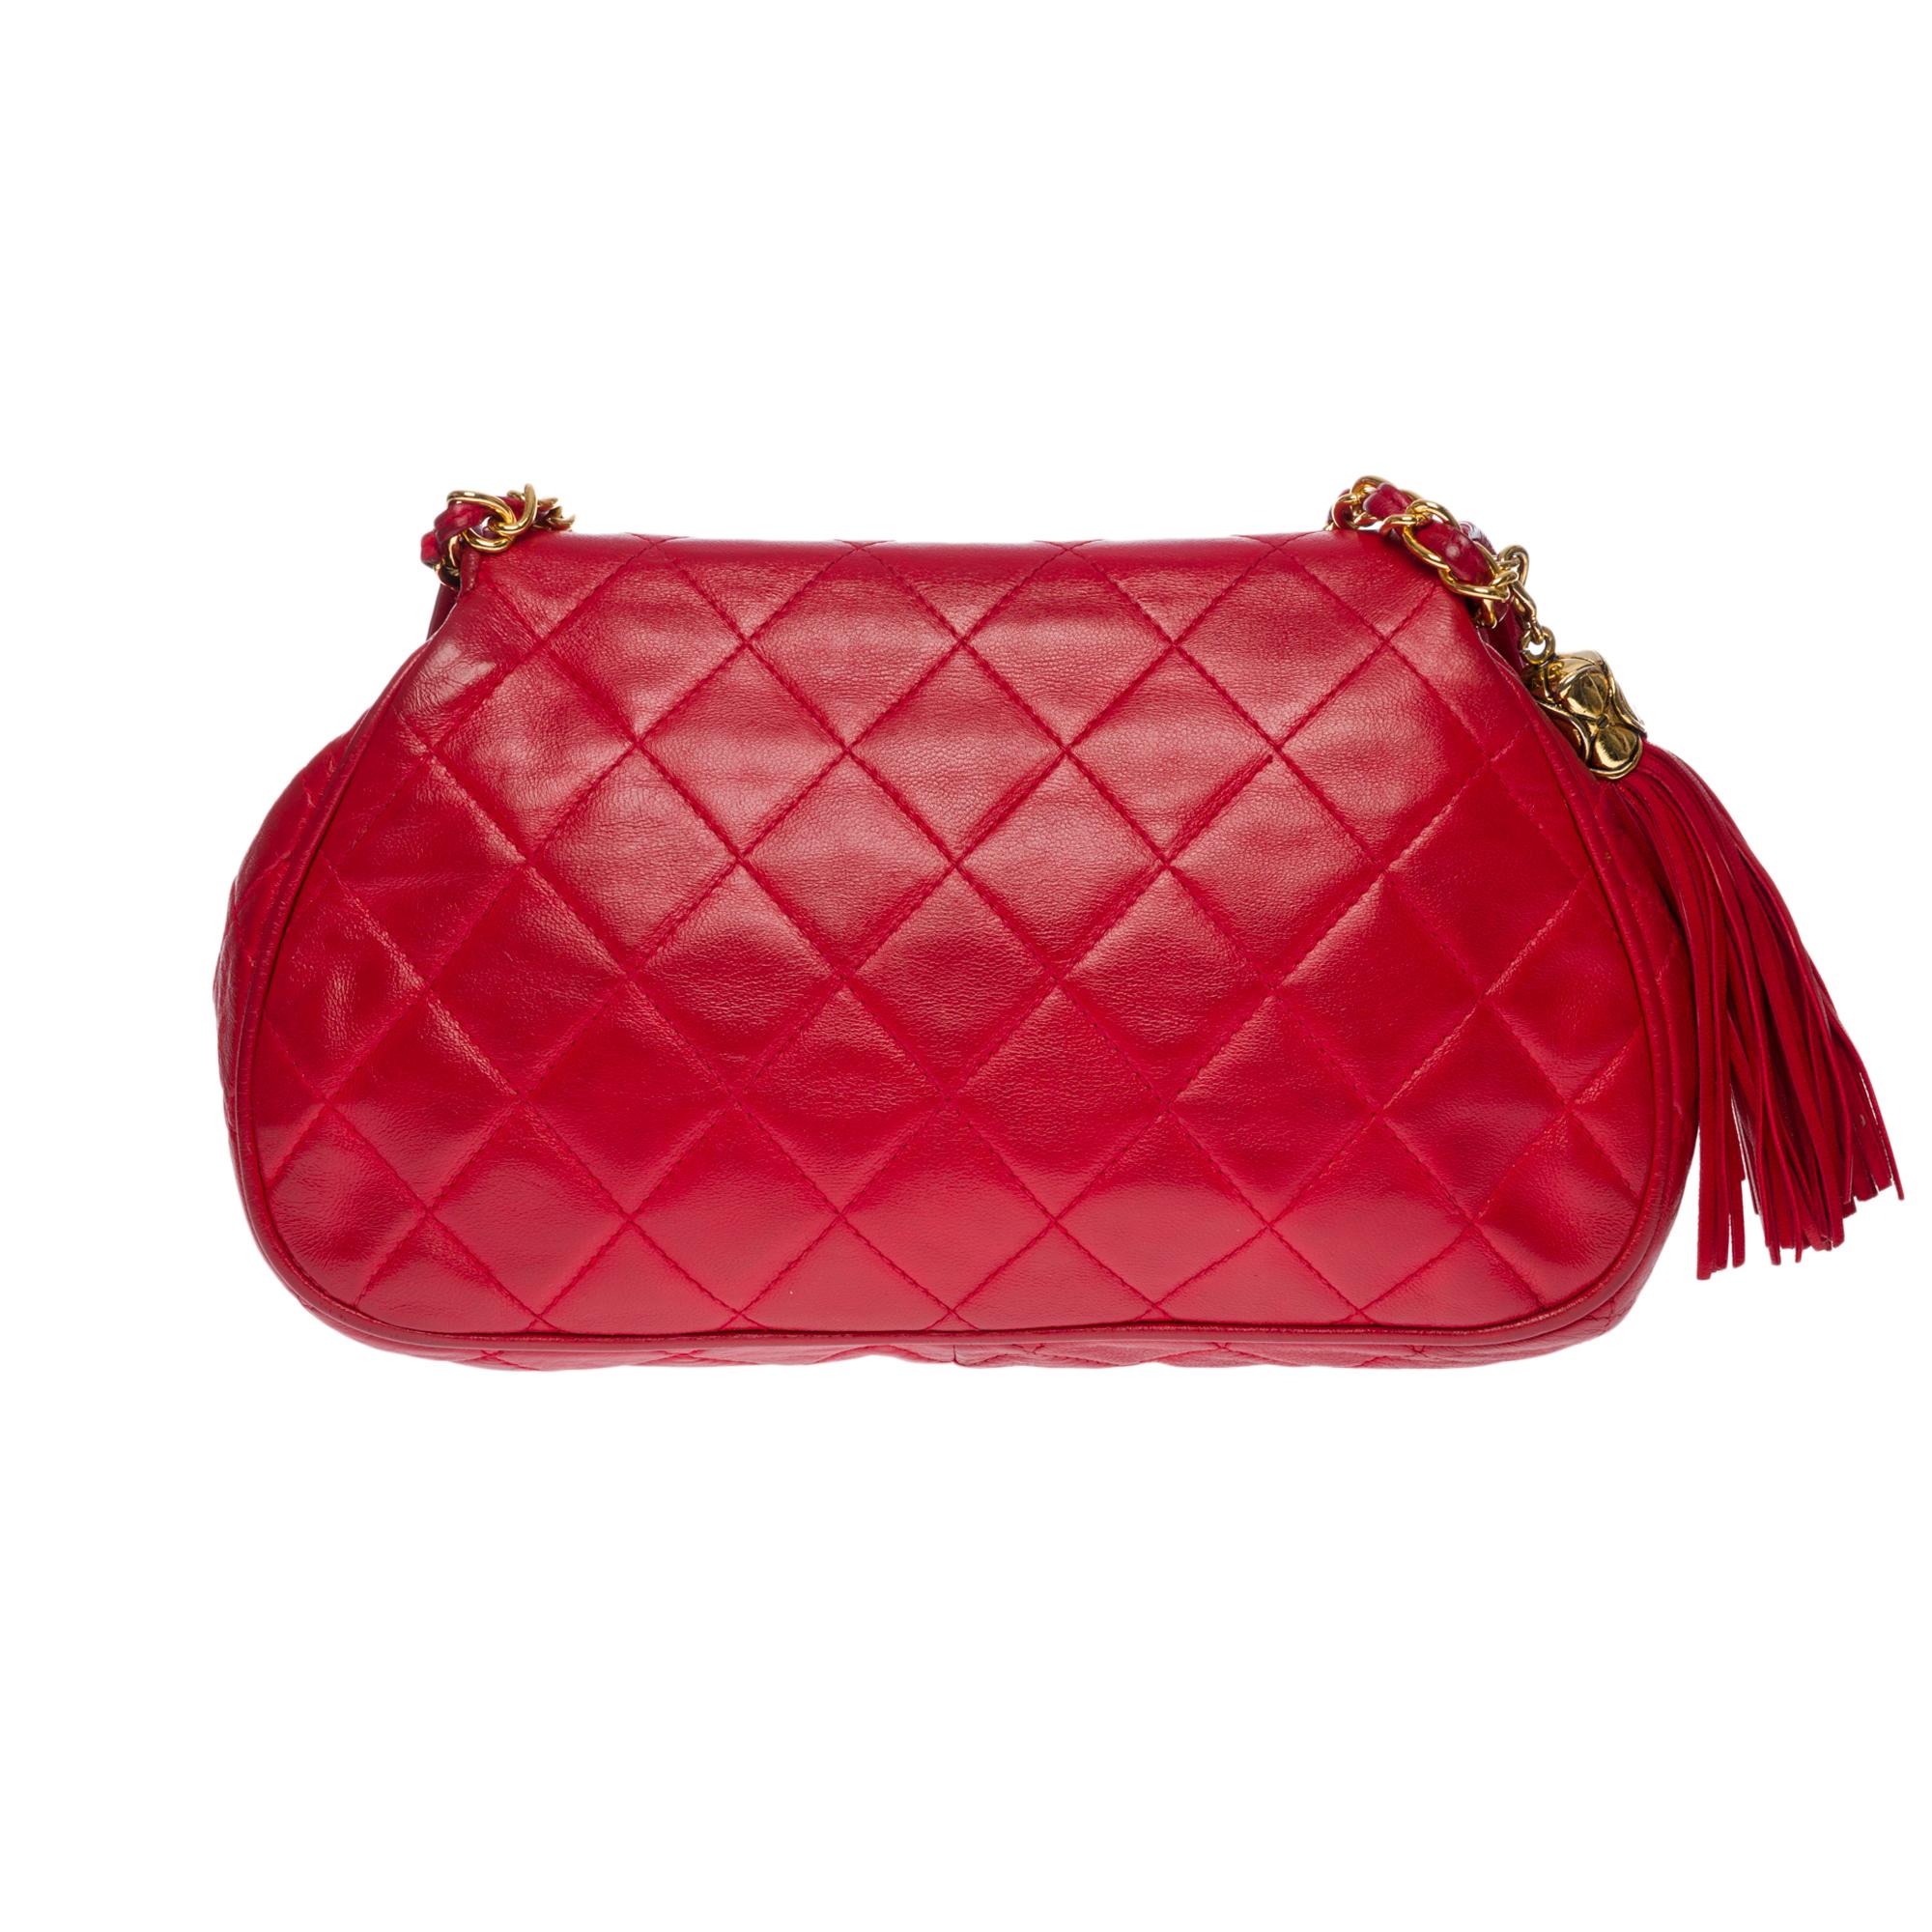 Sublime & Rare bag Chanel Classic Flap bag medium 25 cm in red quilted lambskin, gold metal hardware, gold metal chain interwoven with red leather for a shoulder and shoulder strap 
 
Flap closure, gold-tone CC clasp 
Single Flap 
Red leather